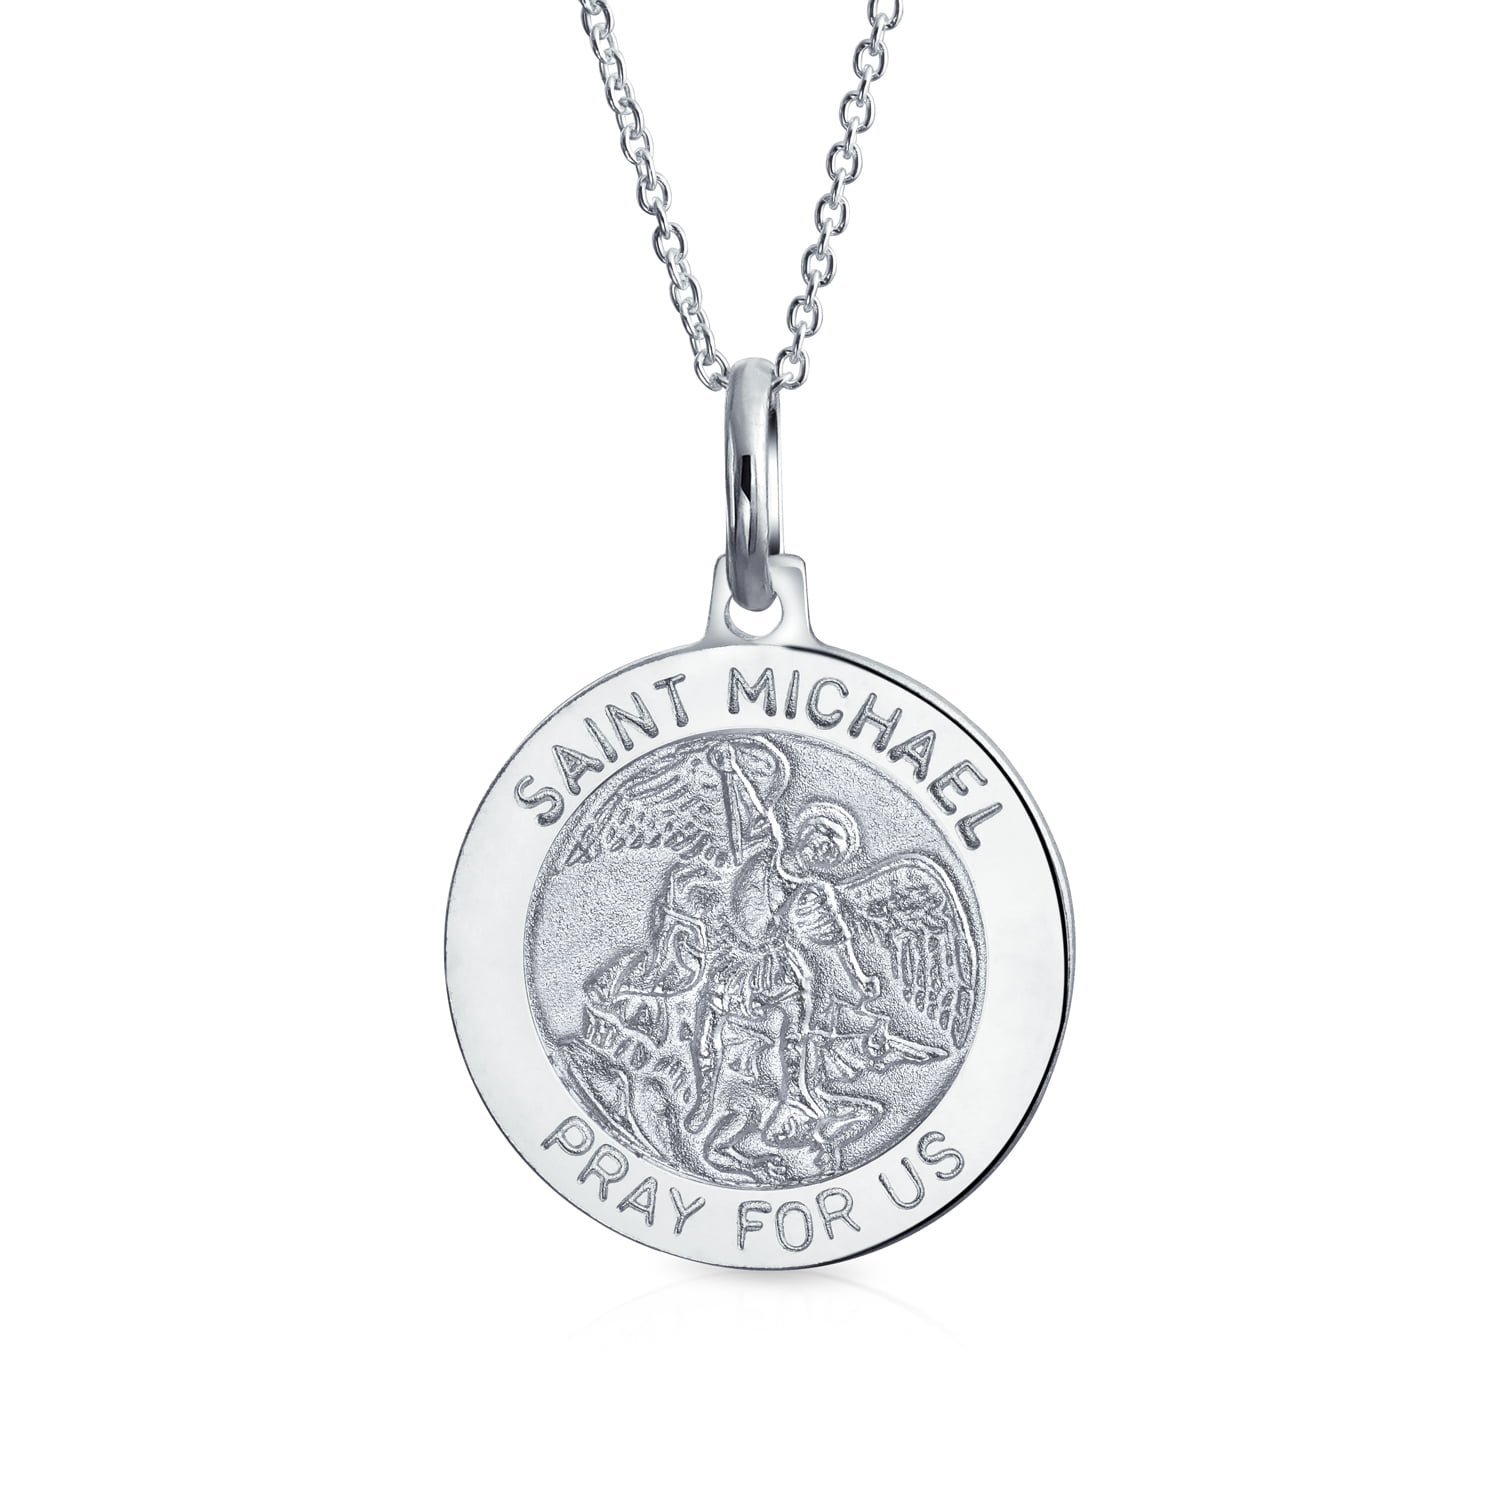 Religious Protection Pendant for Fire Fighters and Police Officers Charm Jewelry 925 Sterling Silver Archangel Saint Michael Medal